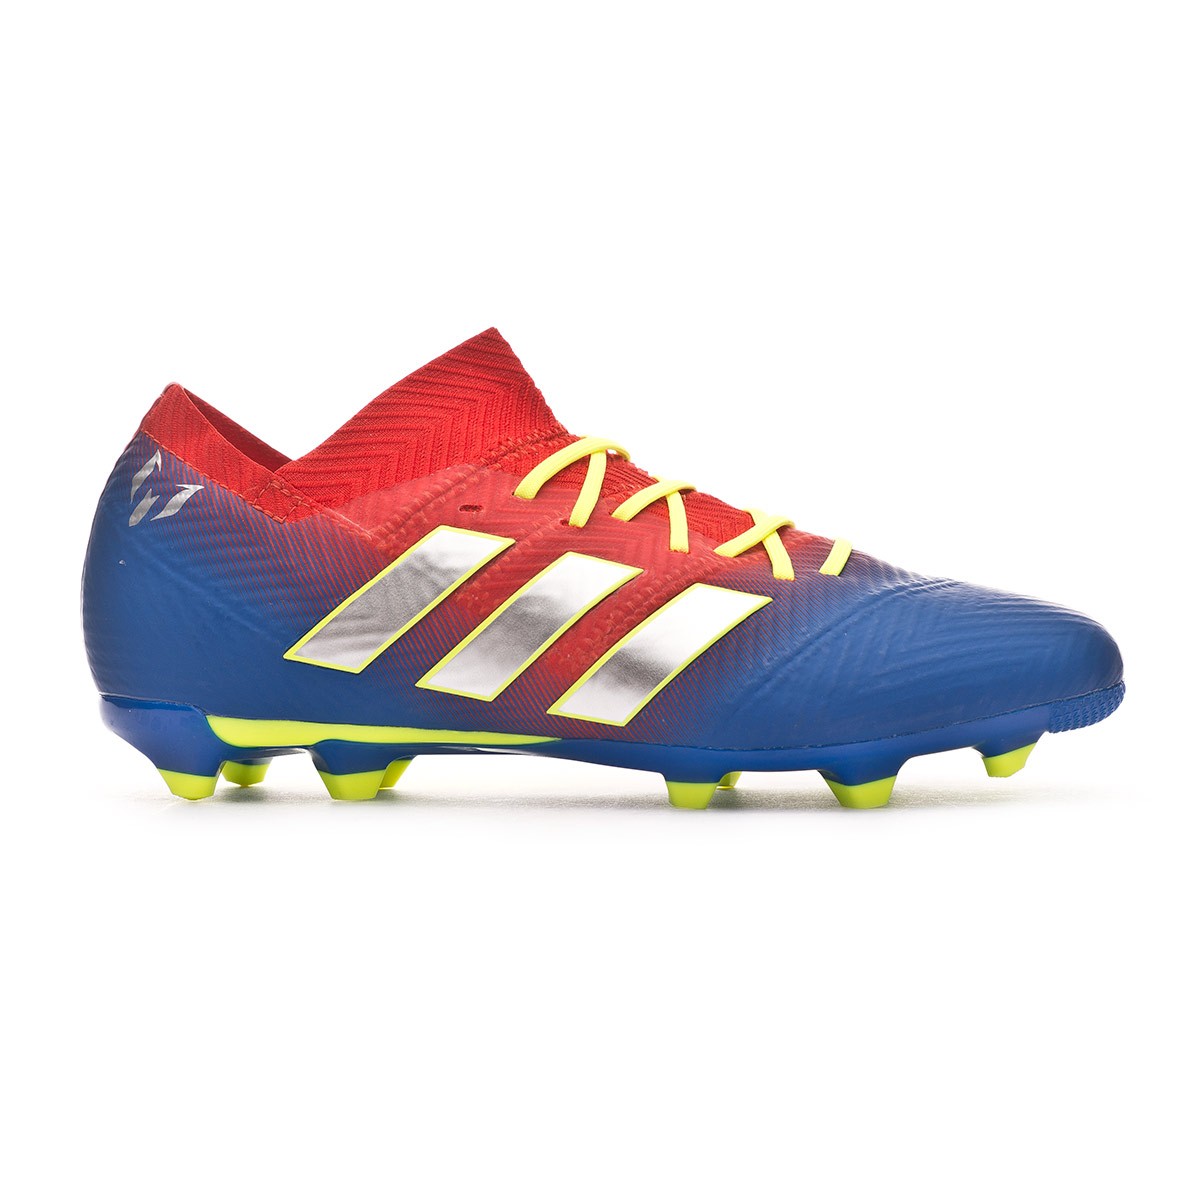 messi 18.1 boots